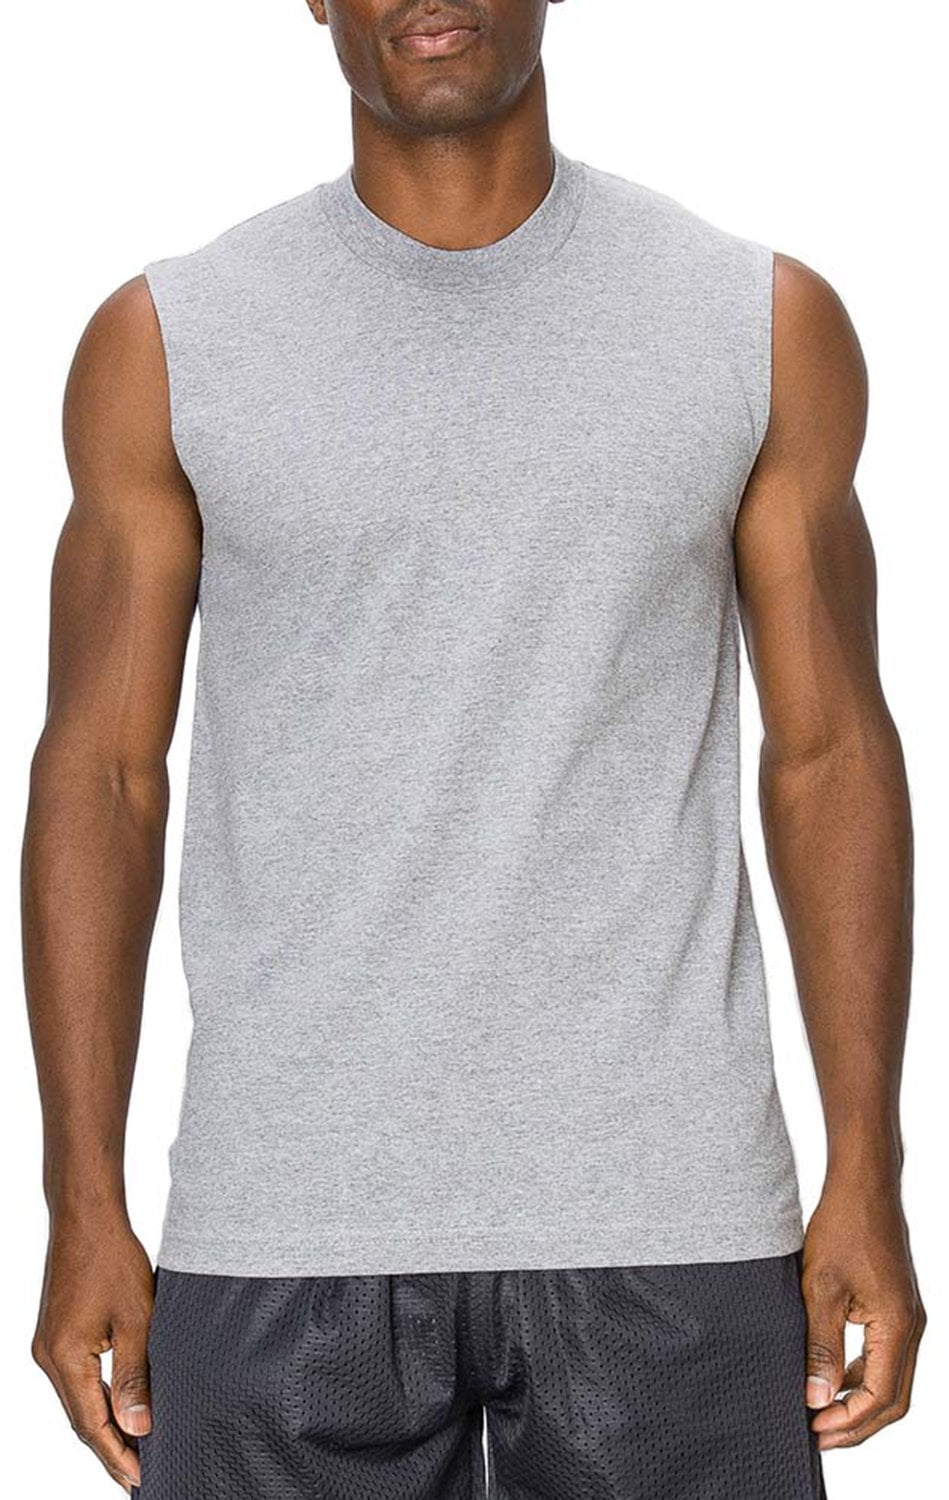 100% NATURAL MUSCLE Strength Training Bodybuilding Athletics Sport Grey T-Shirt 